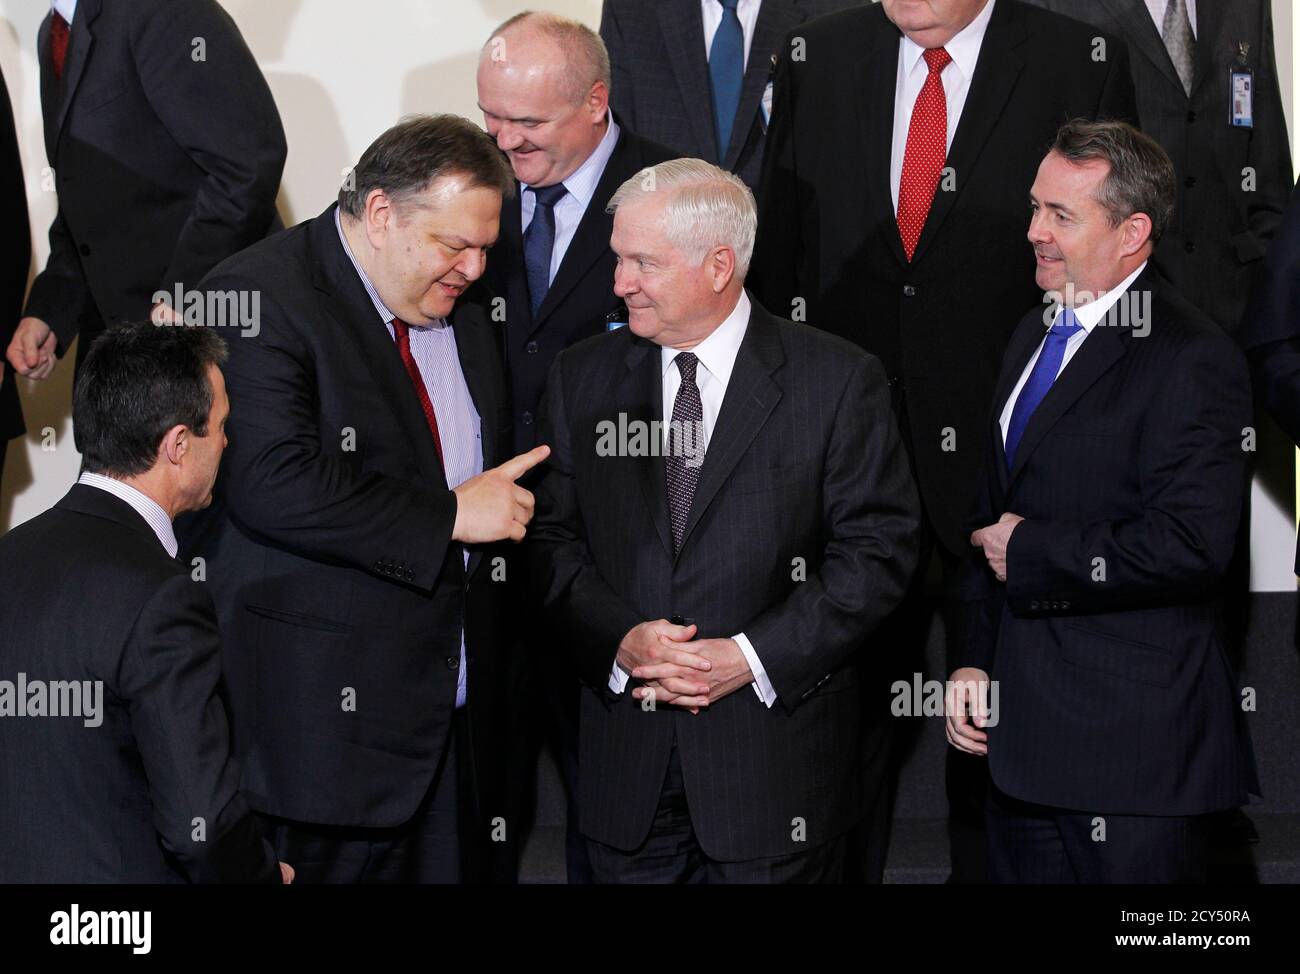 NATO Secretary-General Anders Fogh Rasmussen (L), Greece's Defence Minister Evangelos Venizelos (2nd L), U.S. Defense Secretary Robert Gates (2nd R) and Britain's Defence Secretary Liam Fox (R) talk during a family photo following a NATO defence ministers meeting at the Alliance headquarters in Brussels March 10, 2011. NATO defence ministers meeting in Brussels on Thursday and Friday will discuss options to respond to the turmoil in Libya, including a possible no-fly zone, the officials said.    REUTERS/Thierry Roge   (BELGIUM - Tags: MILITARY POLITICS CONFLICT) Stock Photo